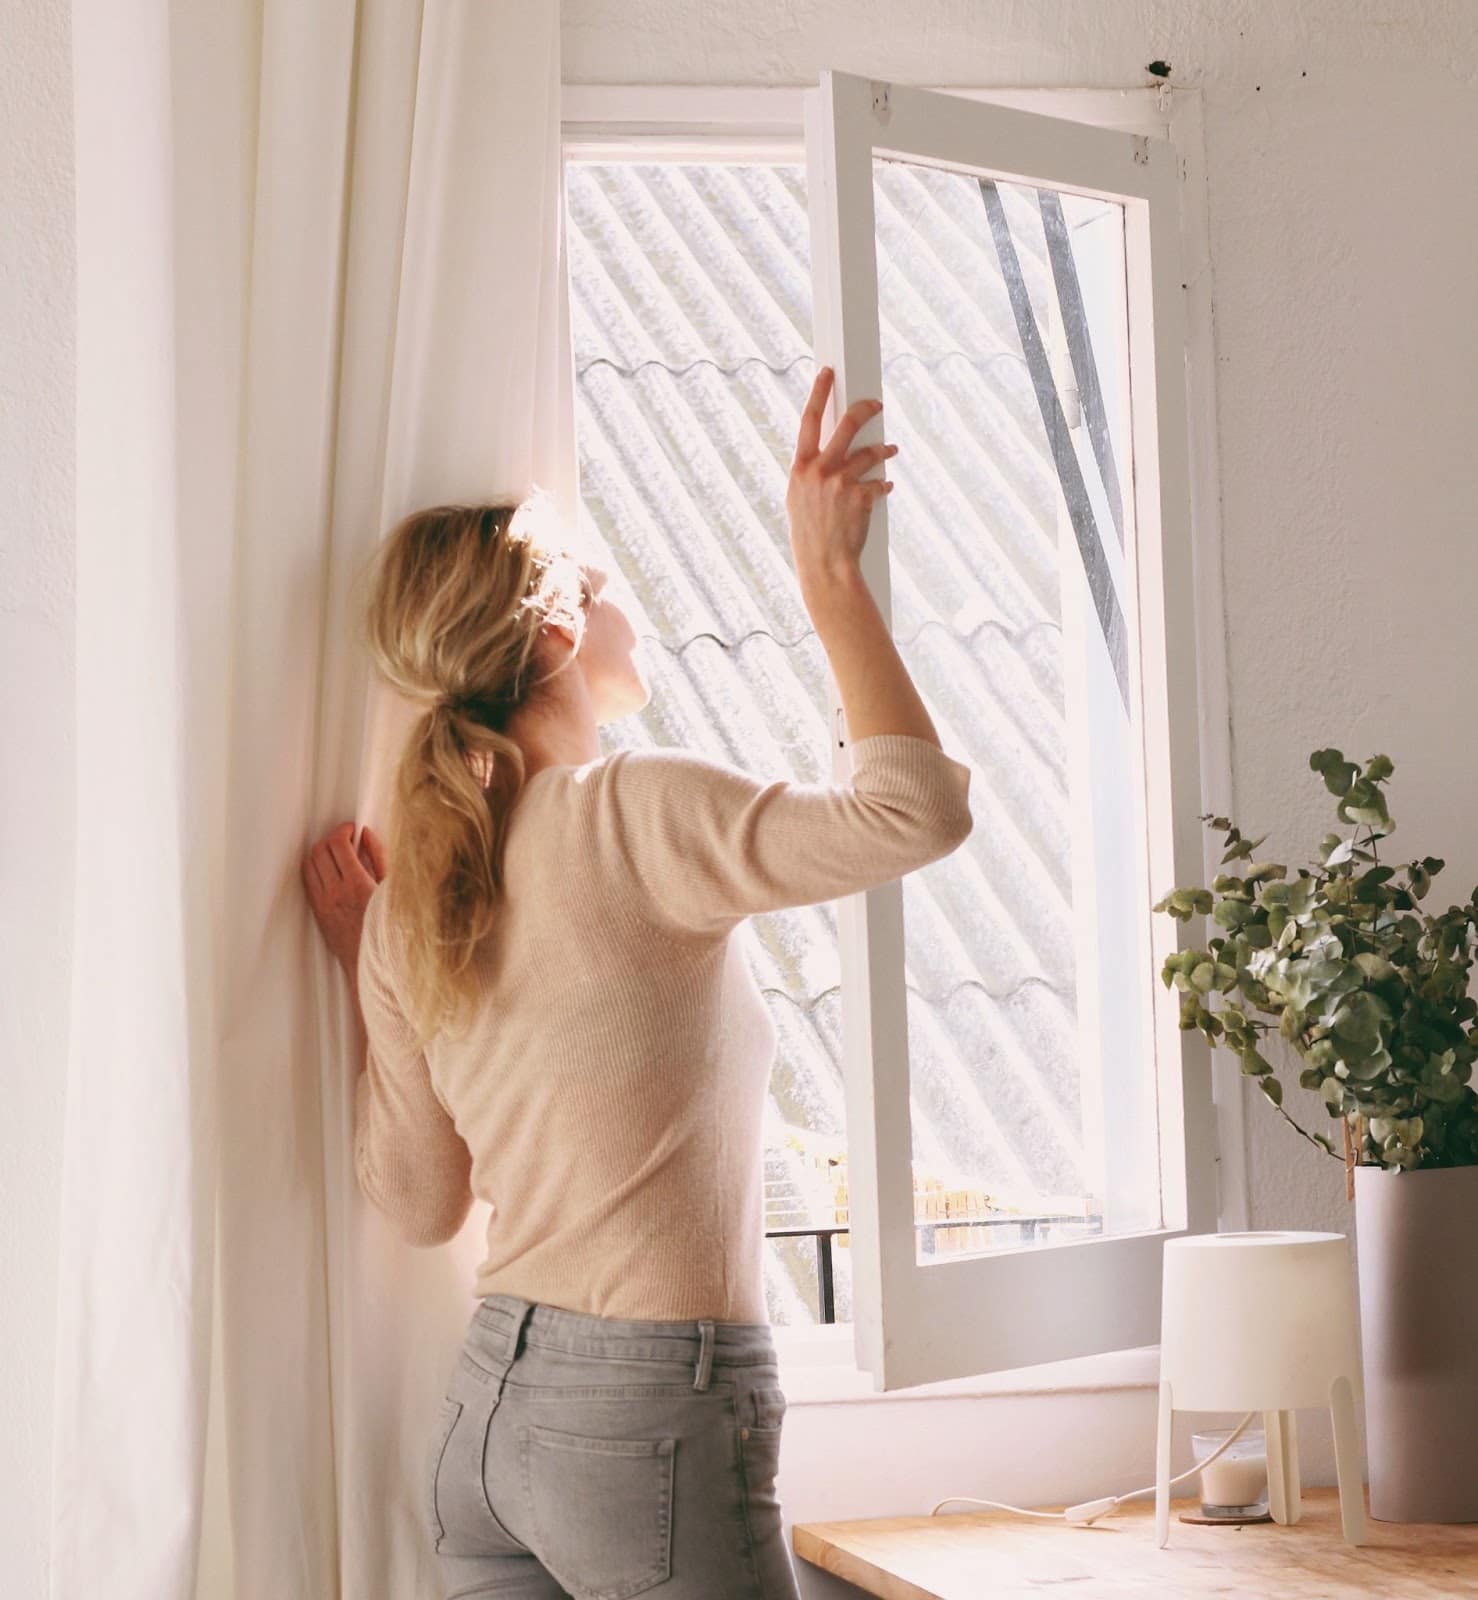 Woman opening window to increase ventilation and improve indoor air quality